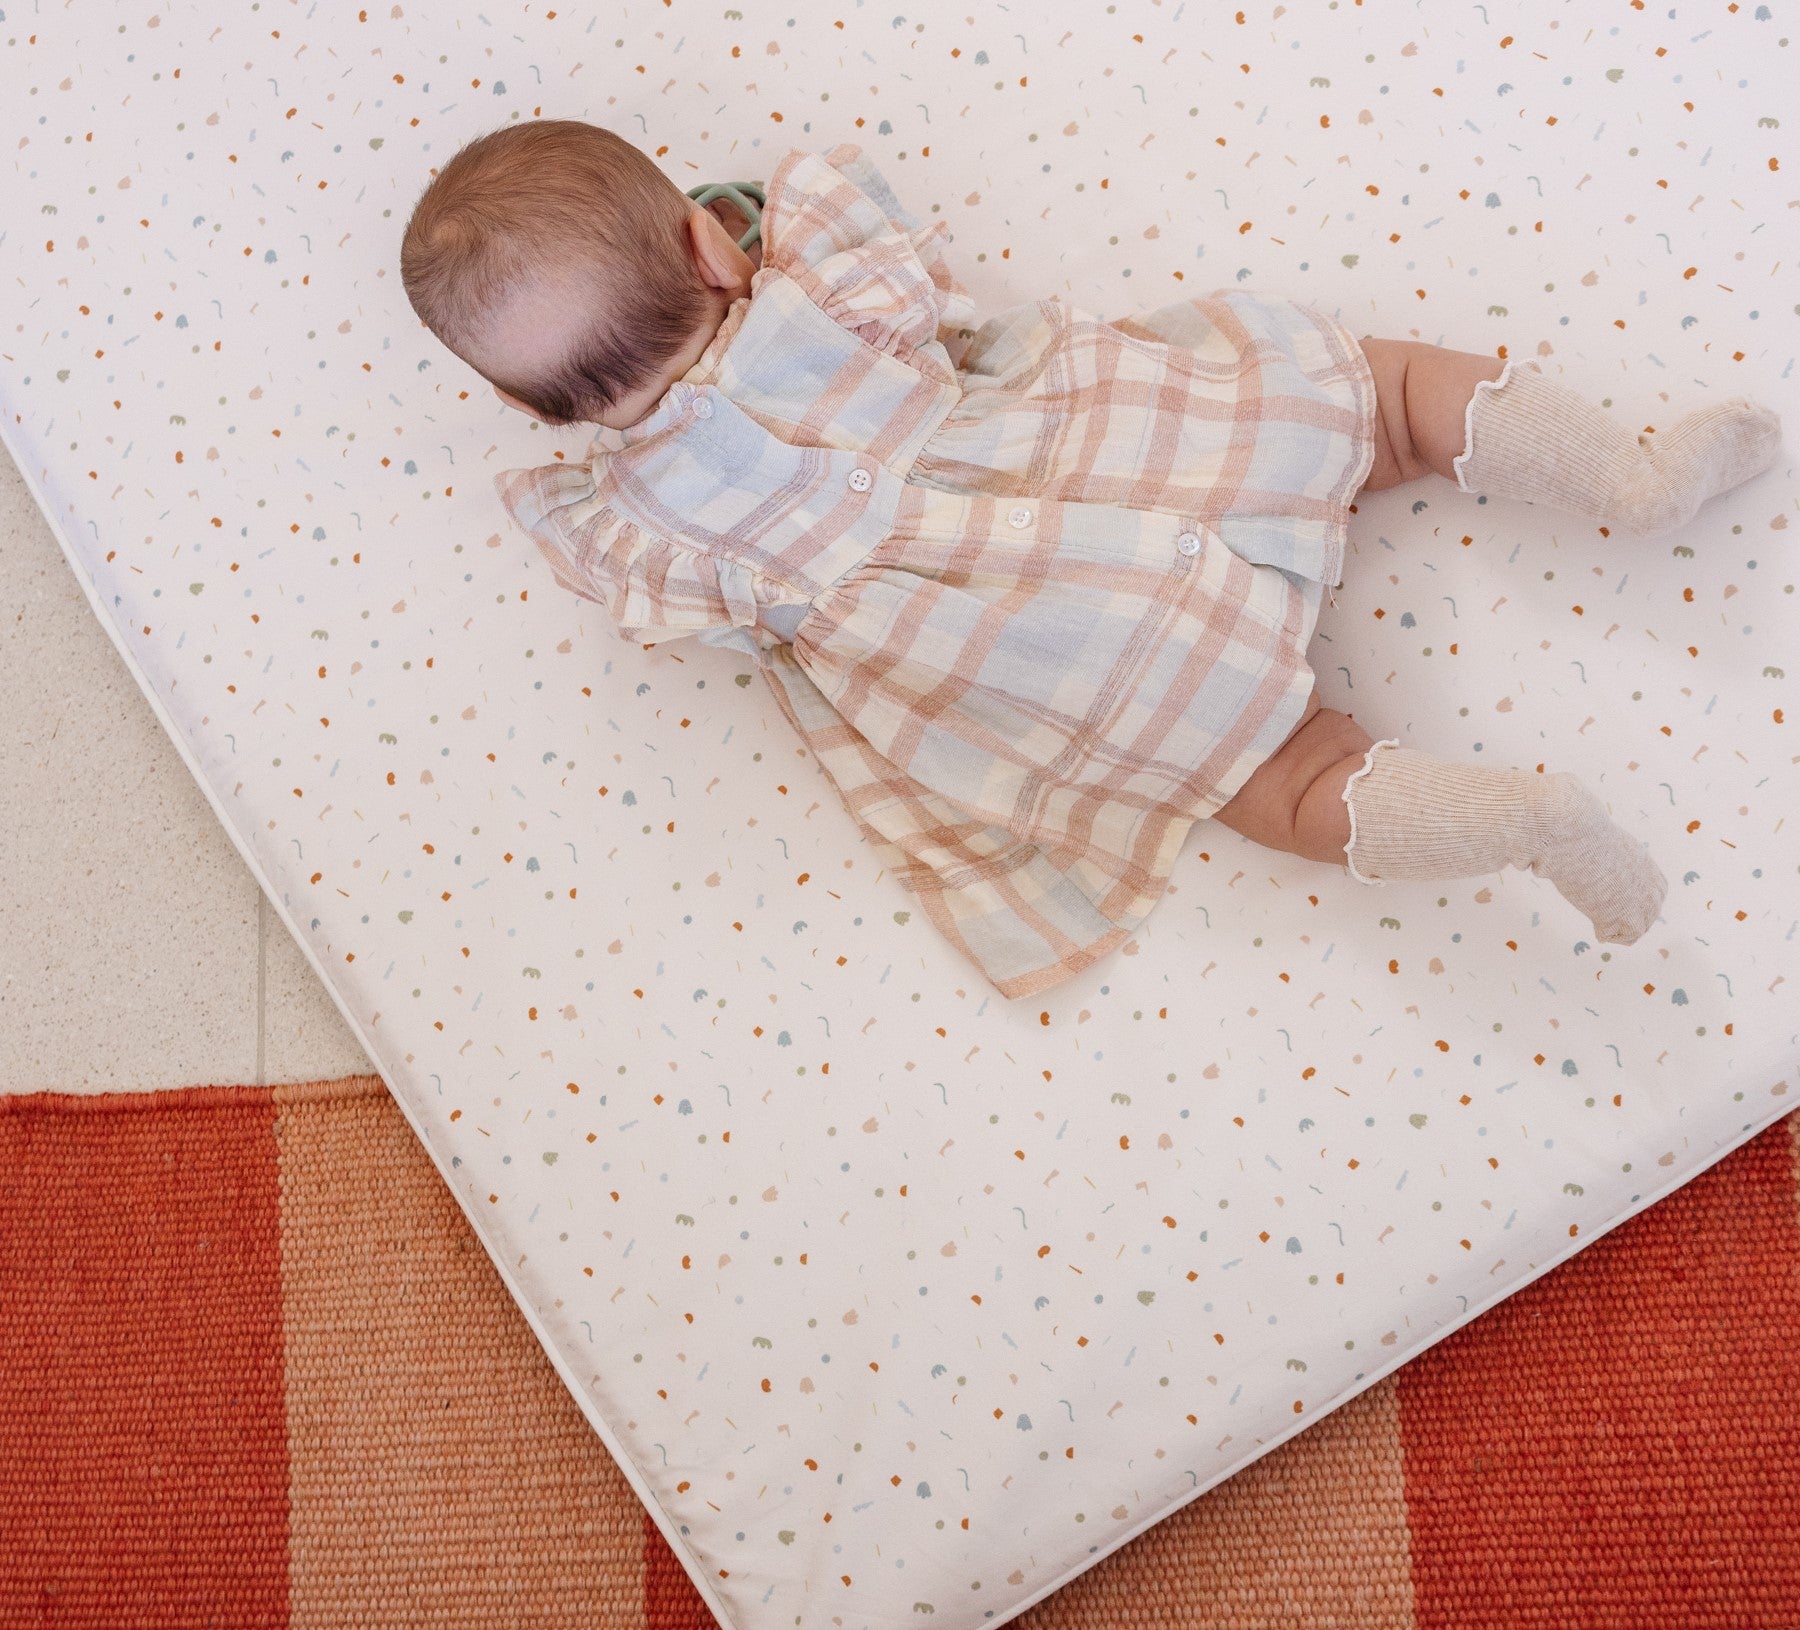 when do infants begin to crawl, how to help baby crawl, at what age do babies crawl